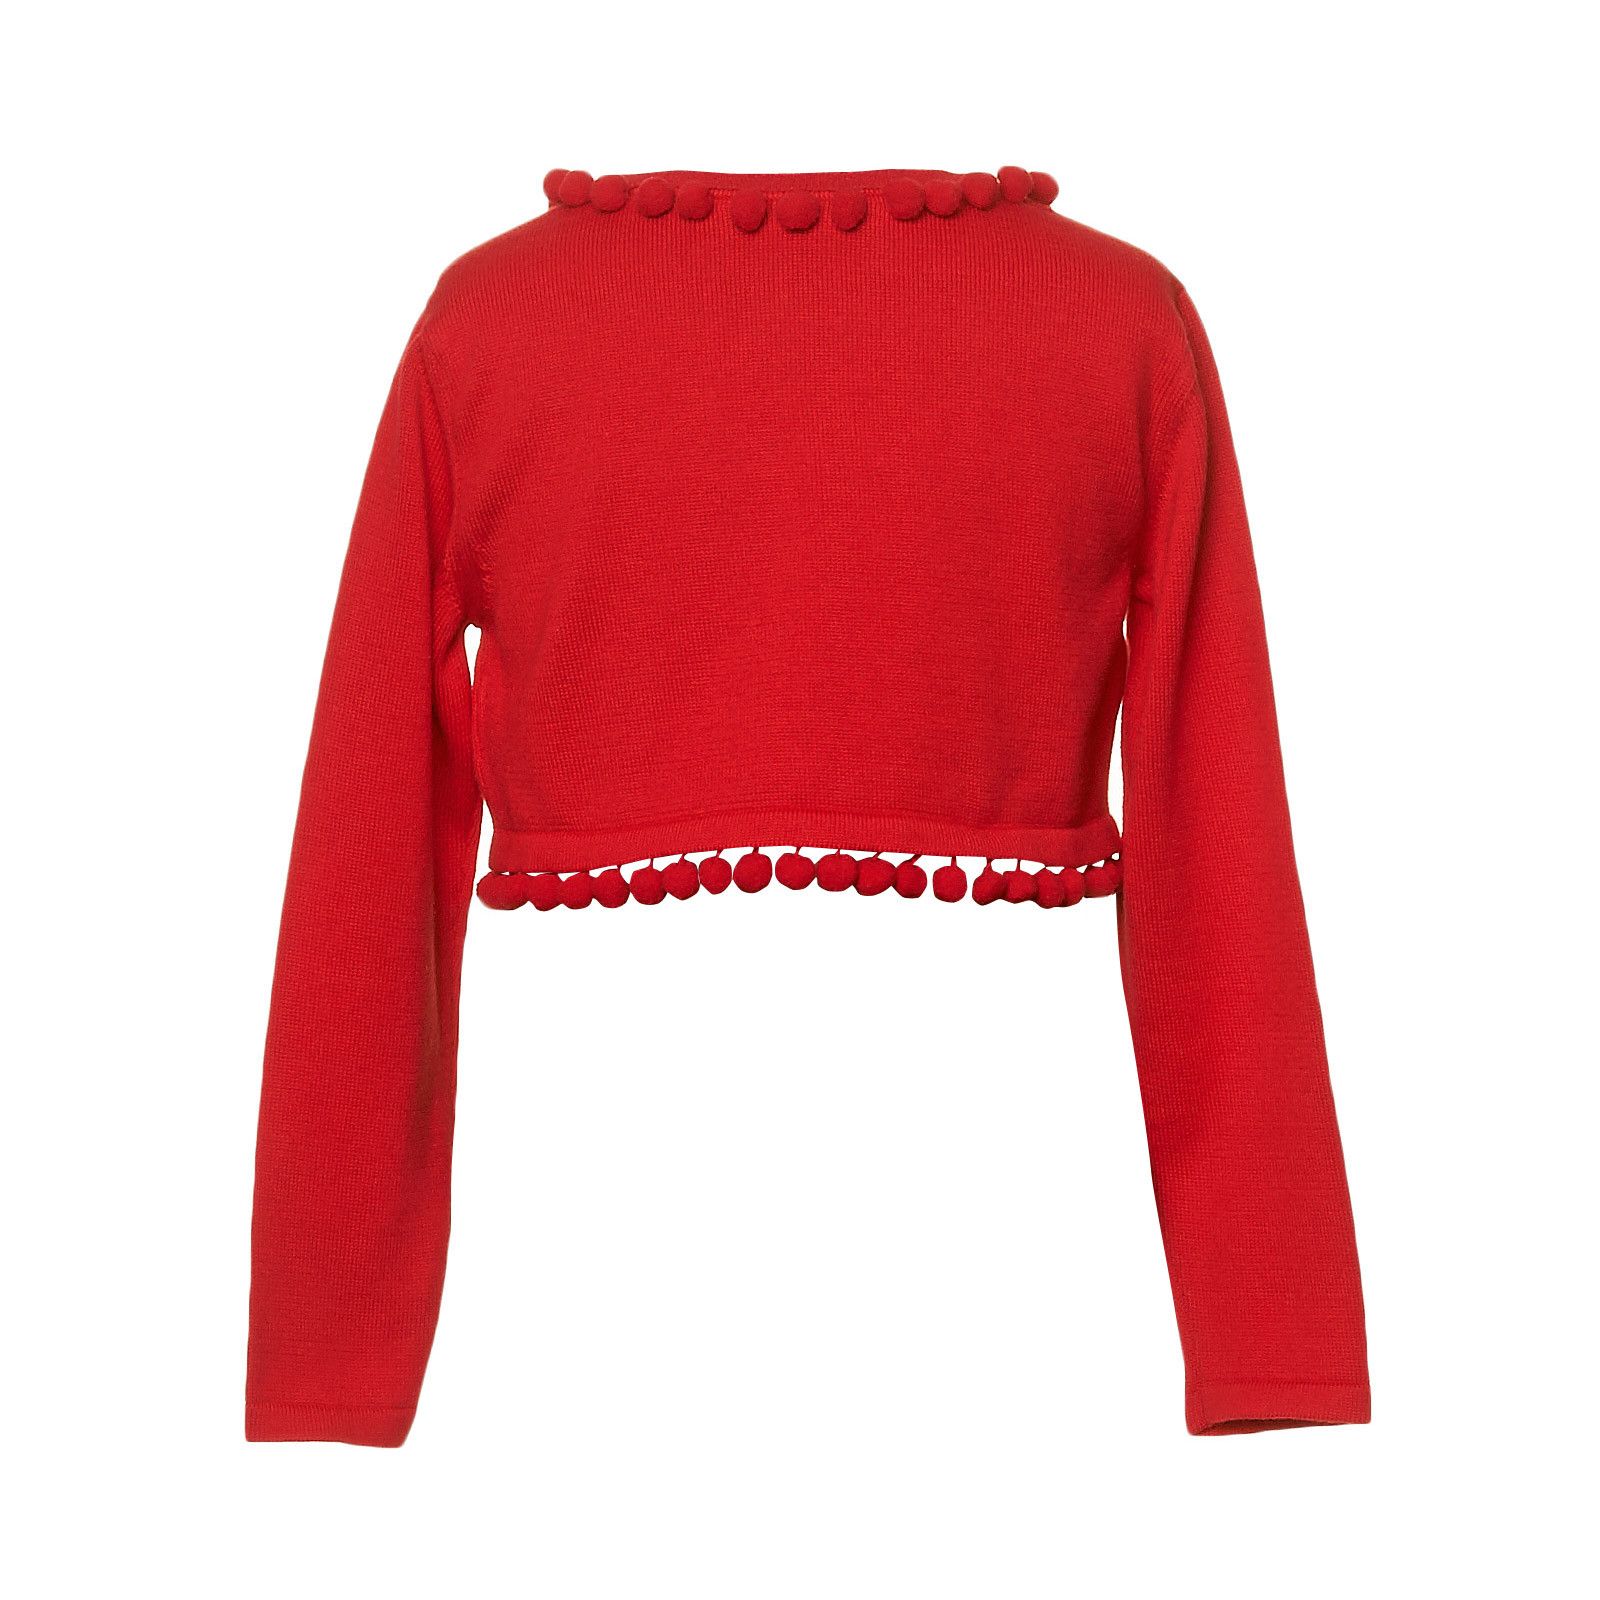 Girls Red Knitted Short Cardigan With Lace Collar - CÉMAROSE | Children's Fashion Store - 2